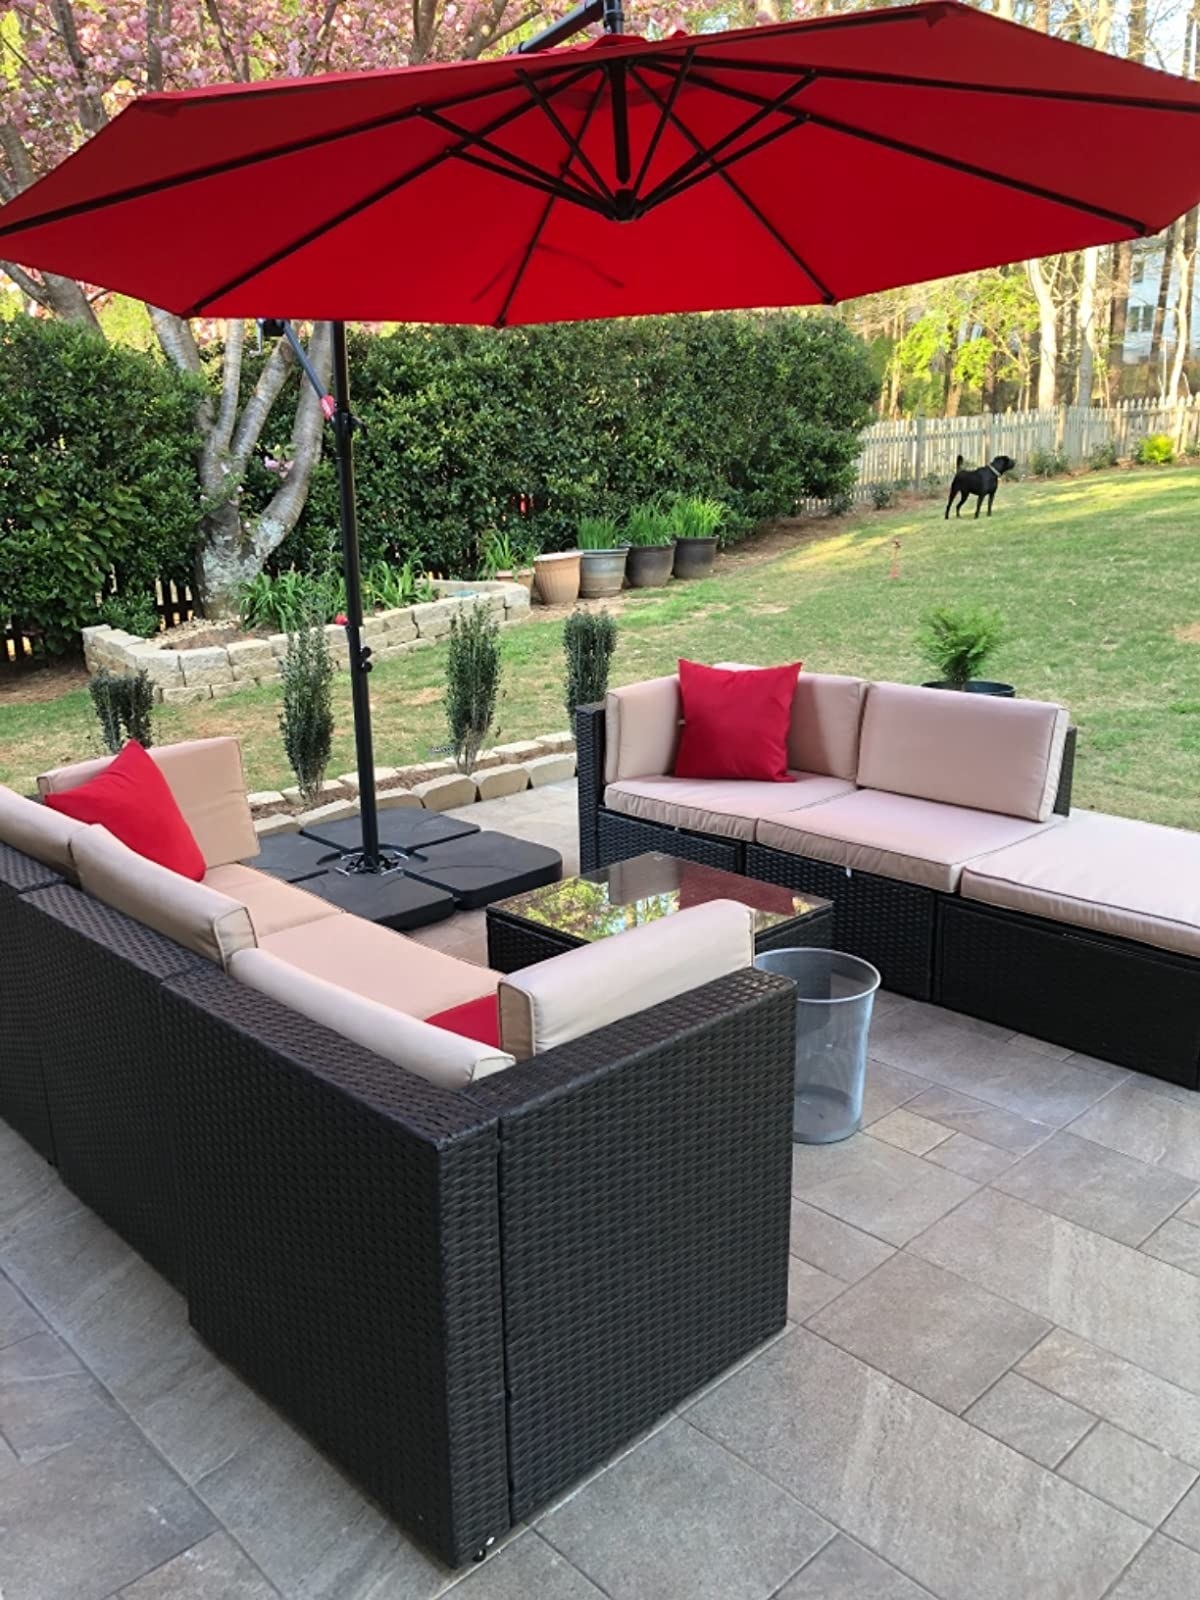 red umbrella on reviewer&#x27;s patio, casting shade over two halves of an outdoor sectional sofa